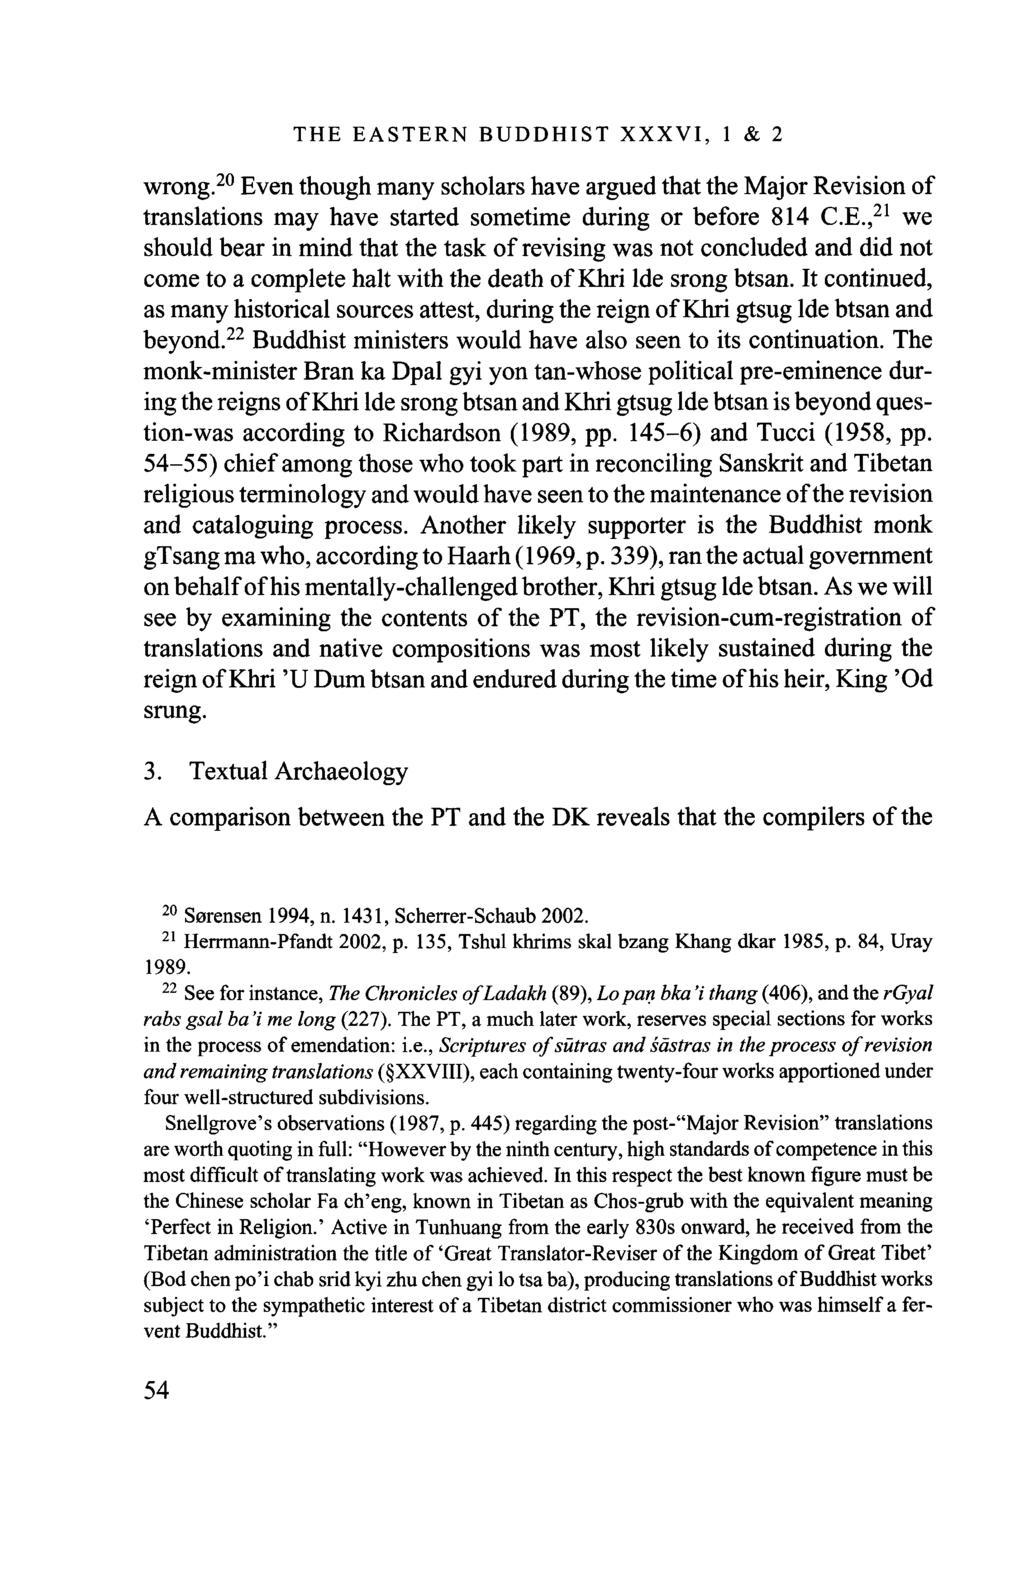 THE EASTERN BUDDHIST XXXVI, 1 & 2 wrong. 20 Even though many scholars have argued that the Major Revision of translations may have started sometime during or before 814 C.E., 21 we should bear in mind that the task of revising was not concluded and did not come to a complete halt with the death of Khri lde srong btsan.